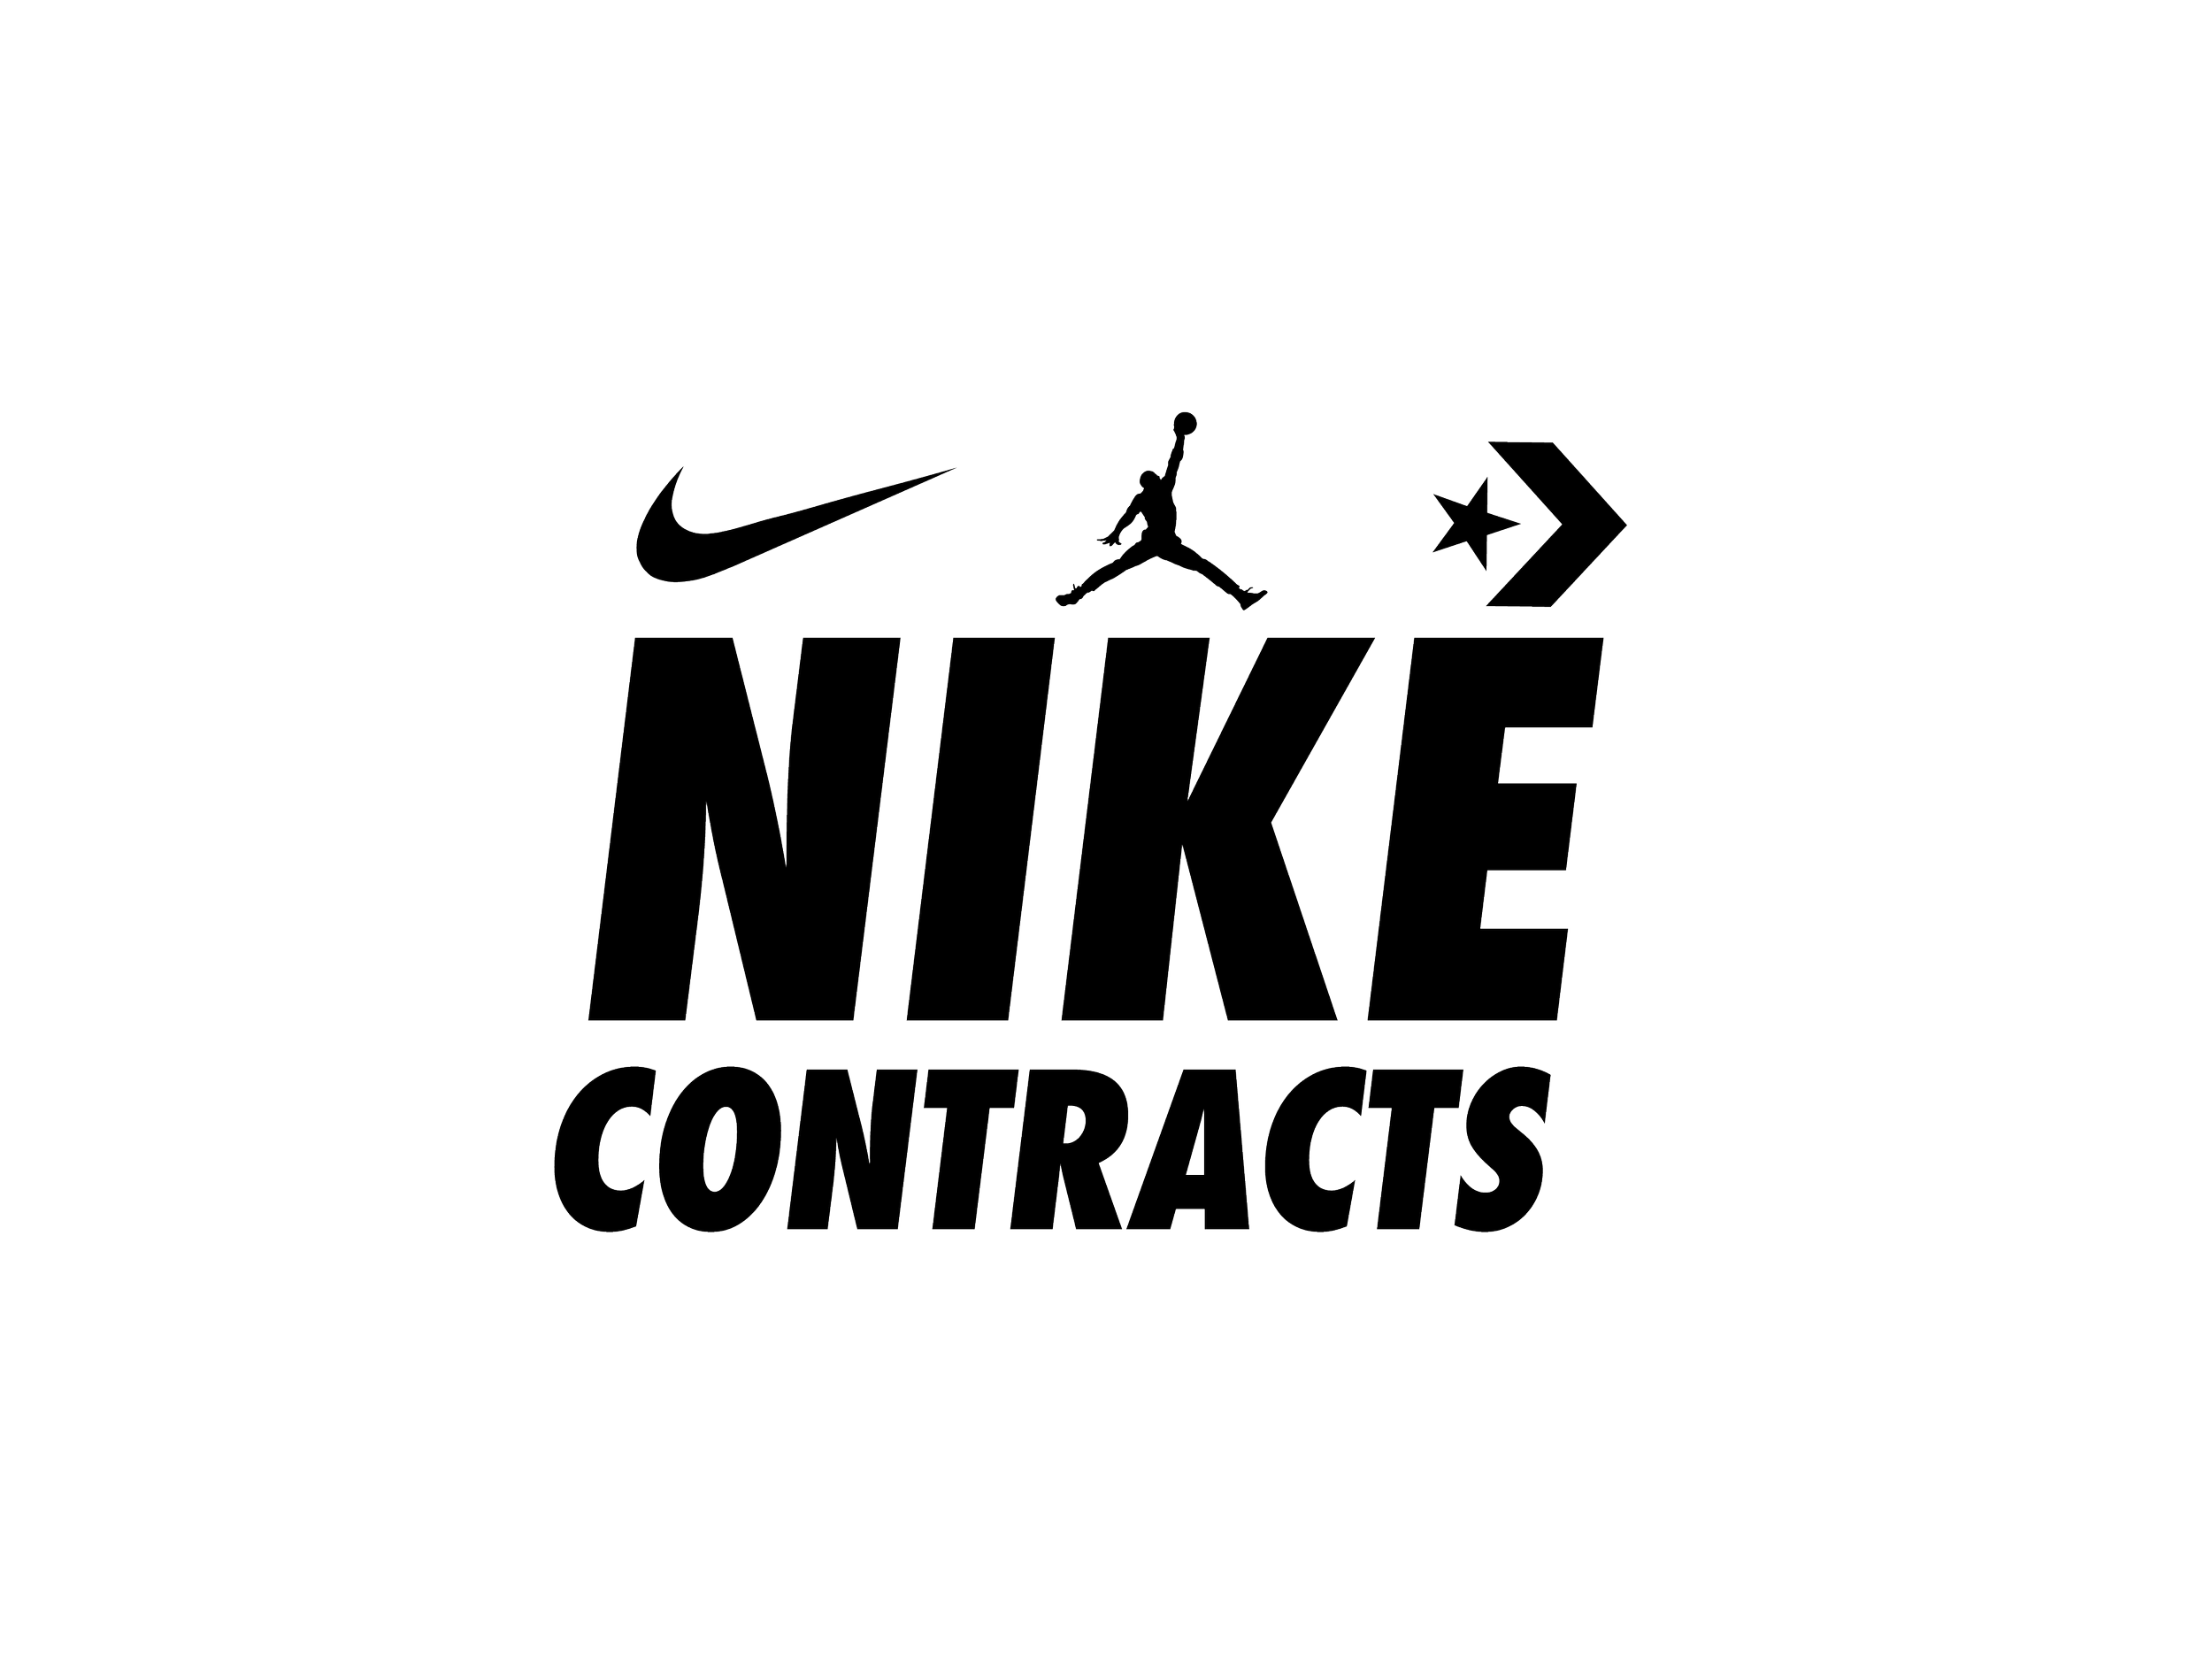 NIKEContracts_WordMark_r1-03.png